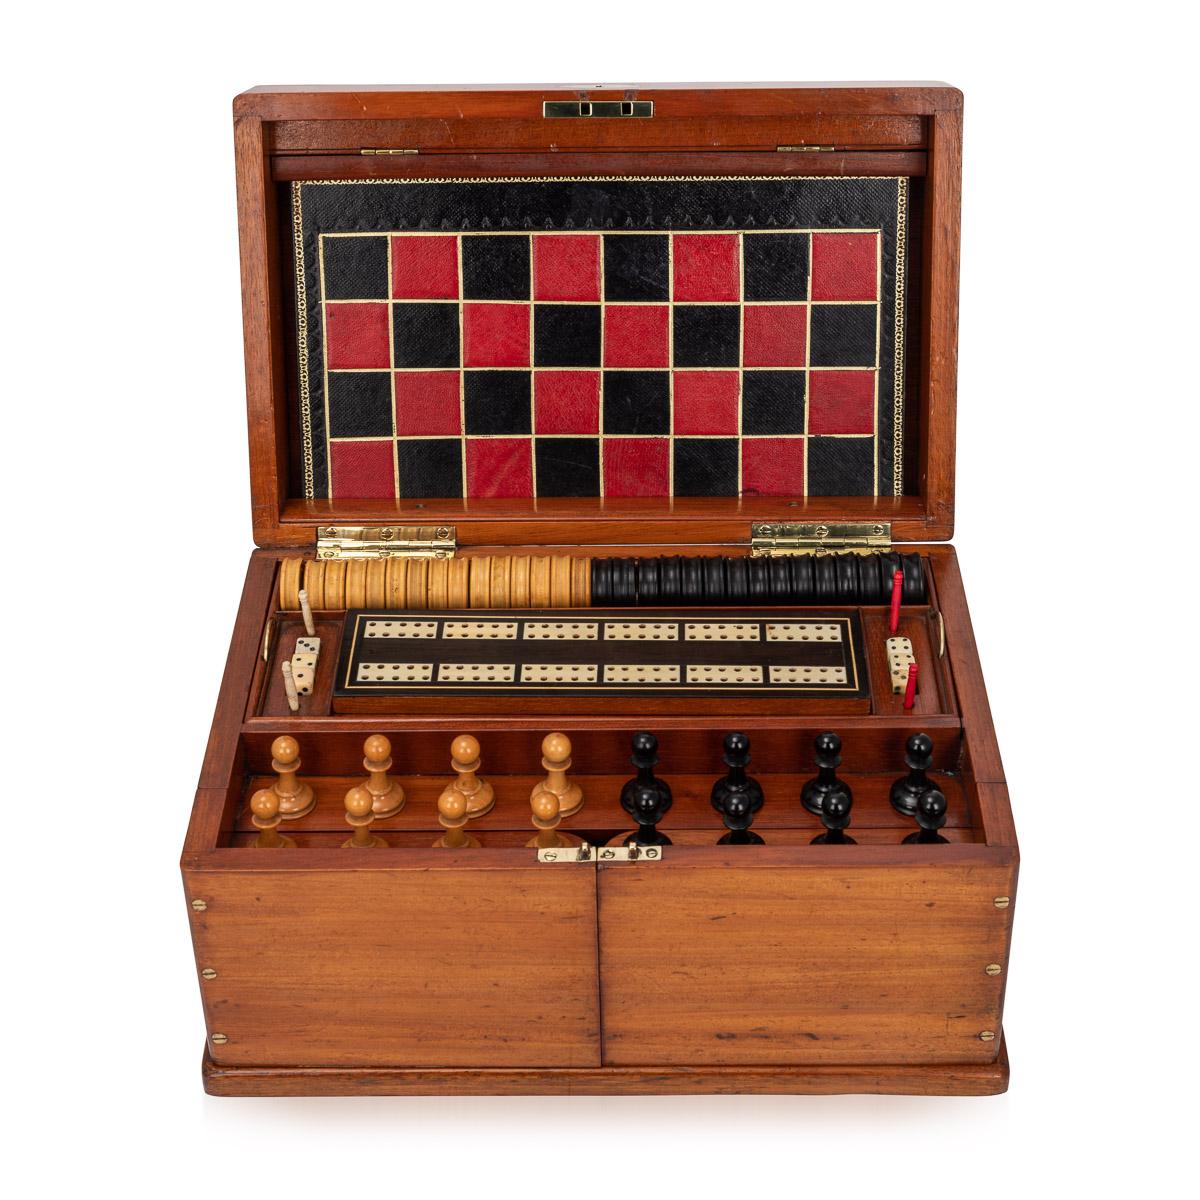 Antique late 19th century Victorian mahogany cased games compendium, the interior comprising a boxwood and ebony chess set, draughts, dominoes, dice, cribbage board with markers, leather bound boards for games, playing cards, droughts counters and a